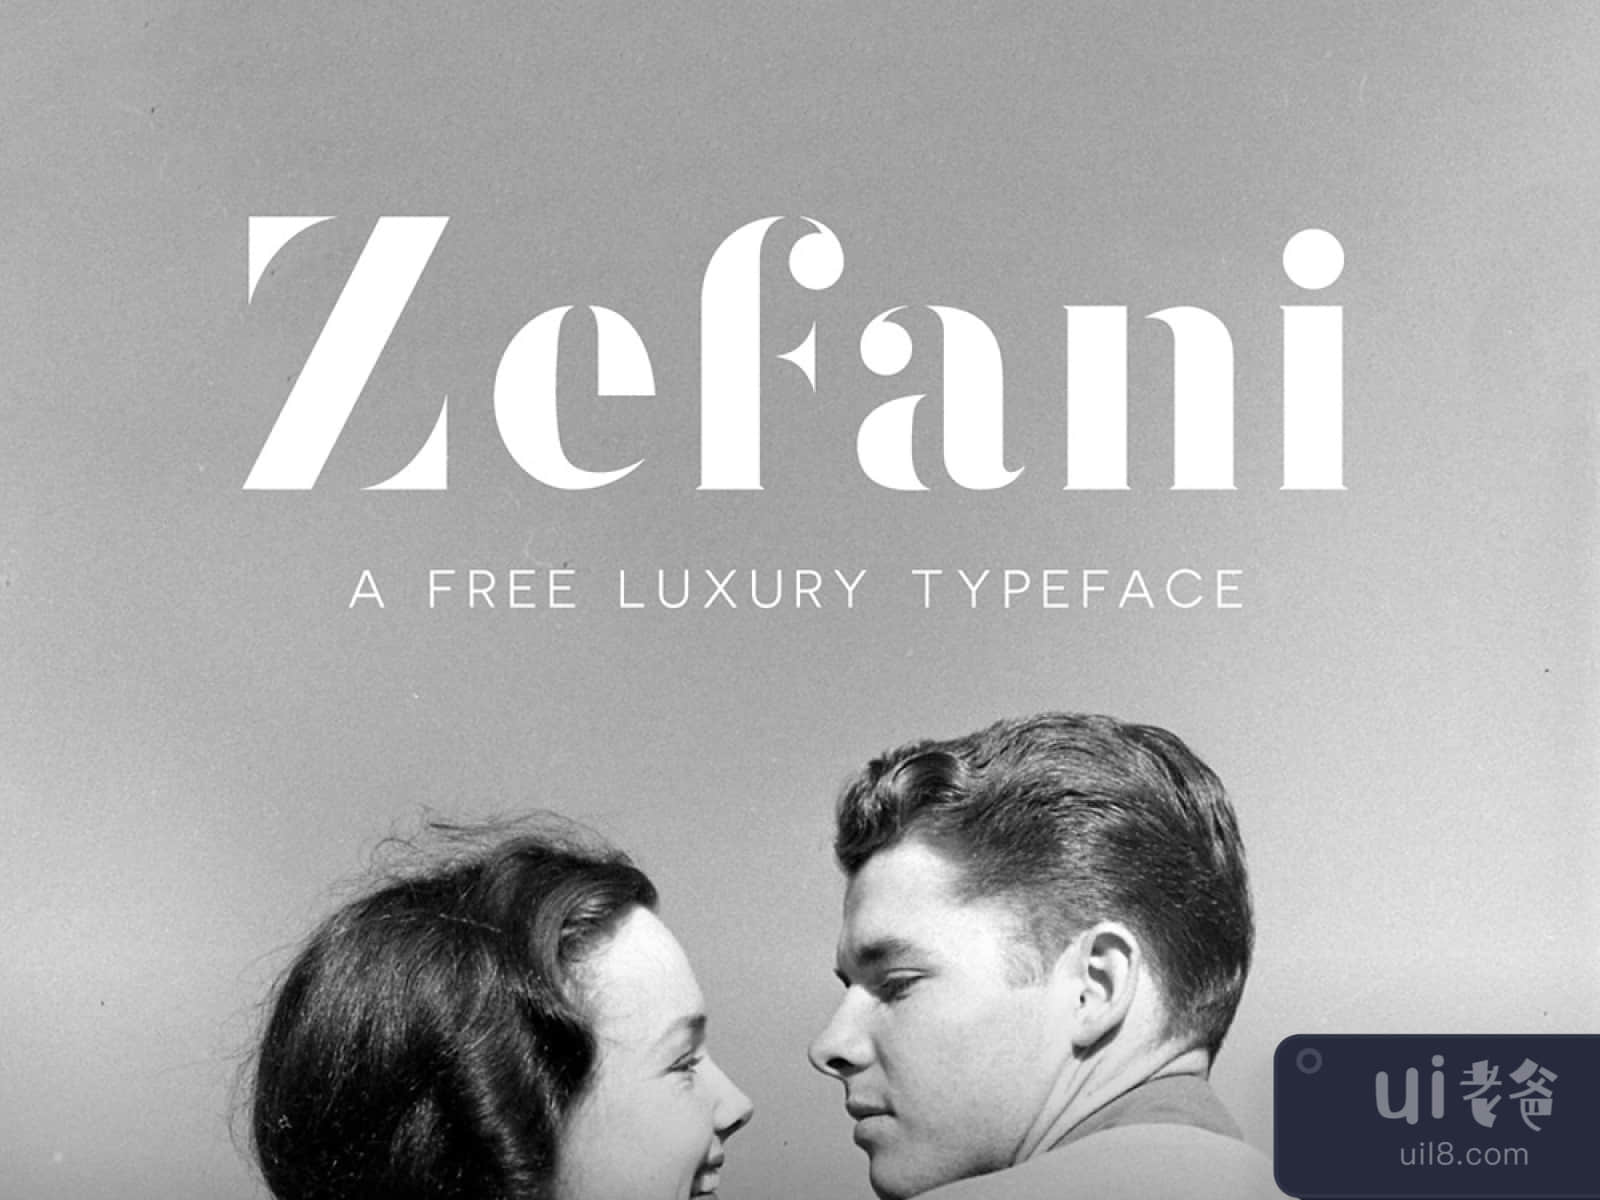 Zefani Free Type Family for Figma and Adobe XD No 1